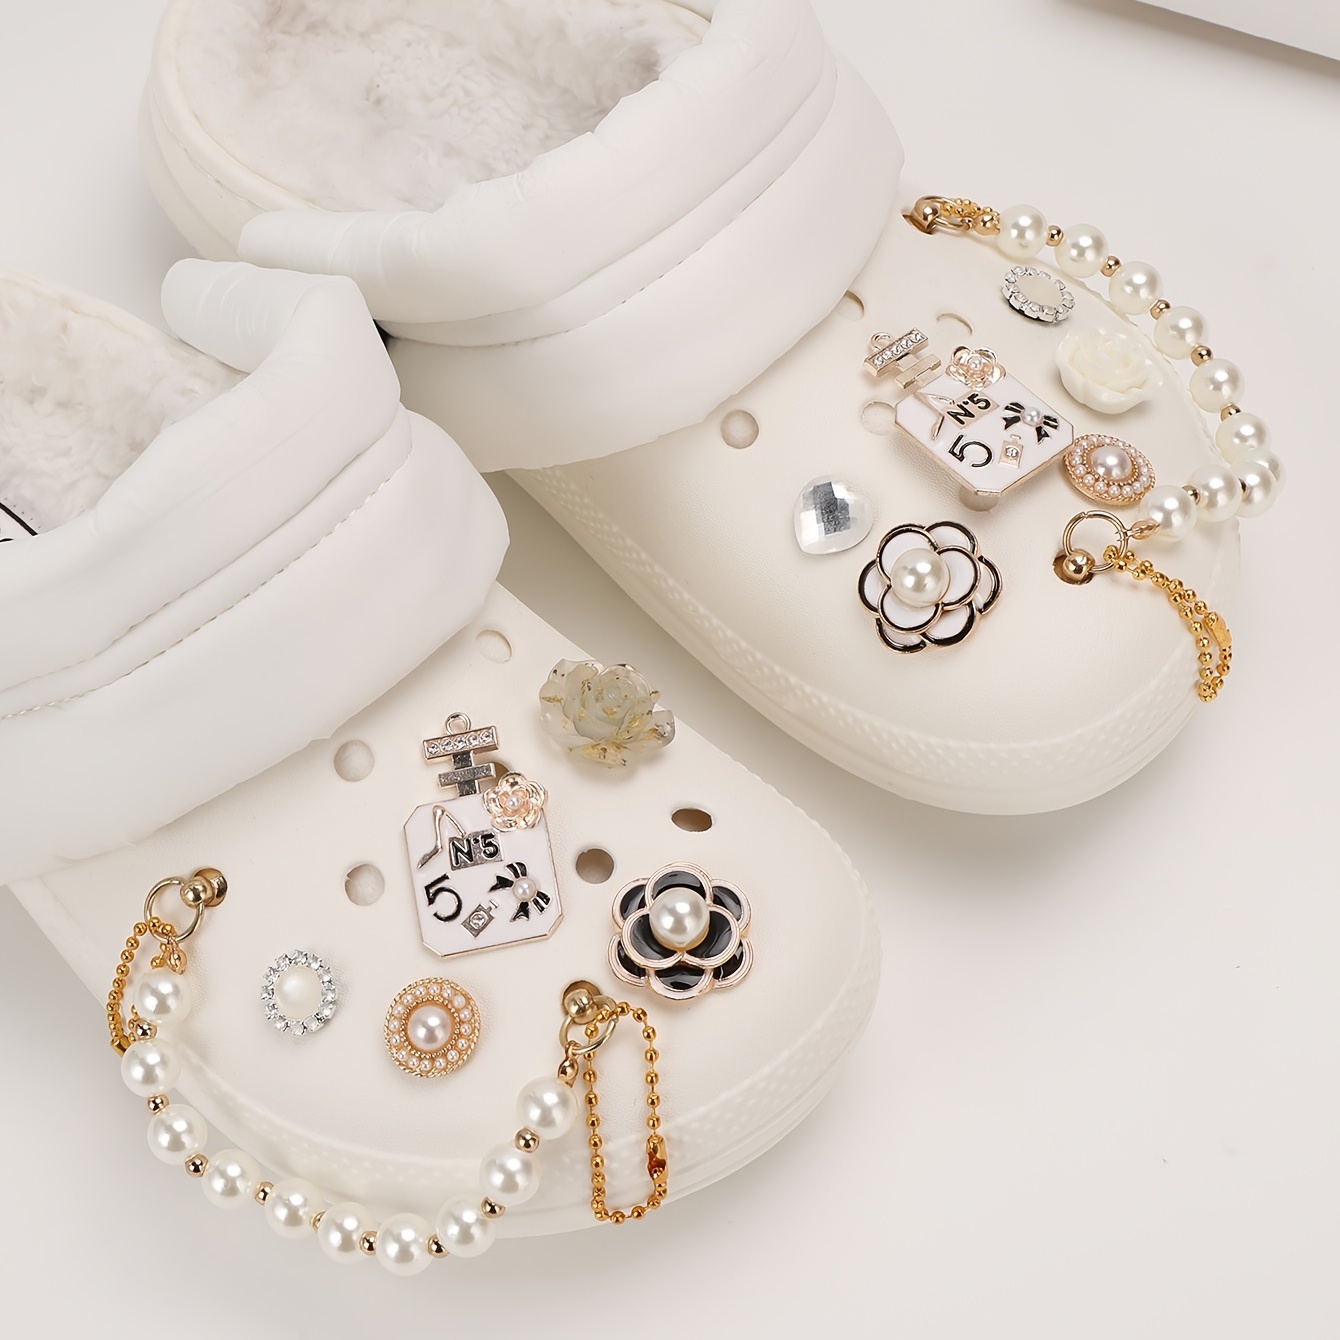 Bling Shoe Charms Decoration For Croc Fit For Kids And Women Party Birthday  Gifts Jewelry Accessories Clog Sandal Shoe Accessories - Temu